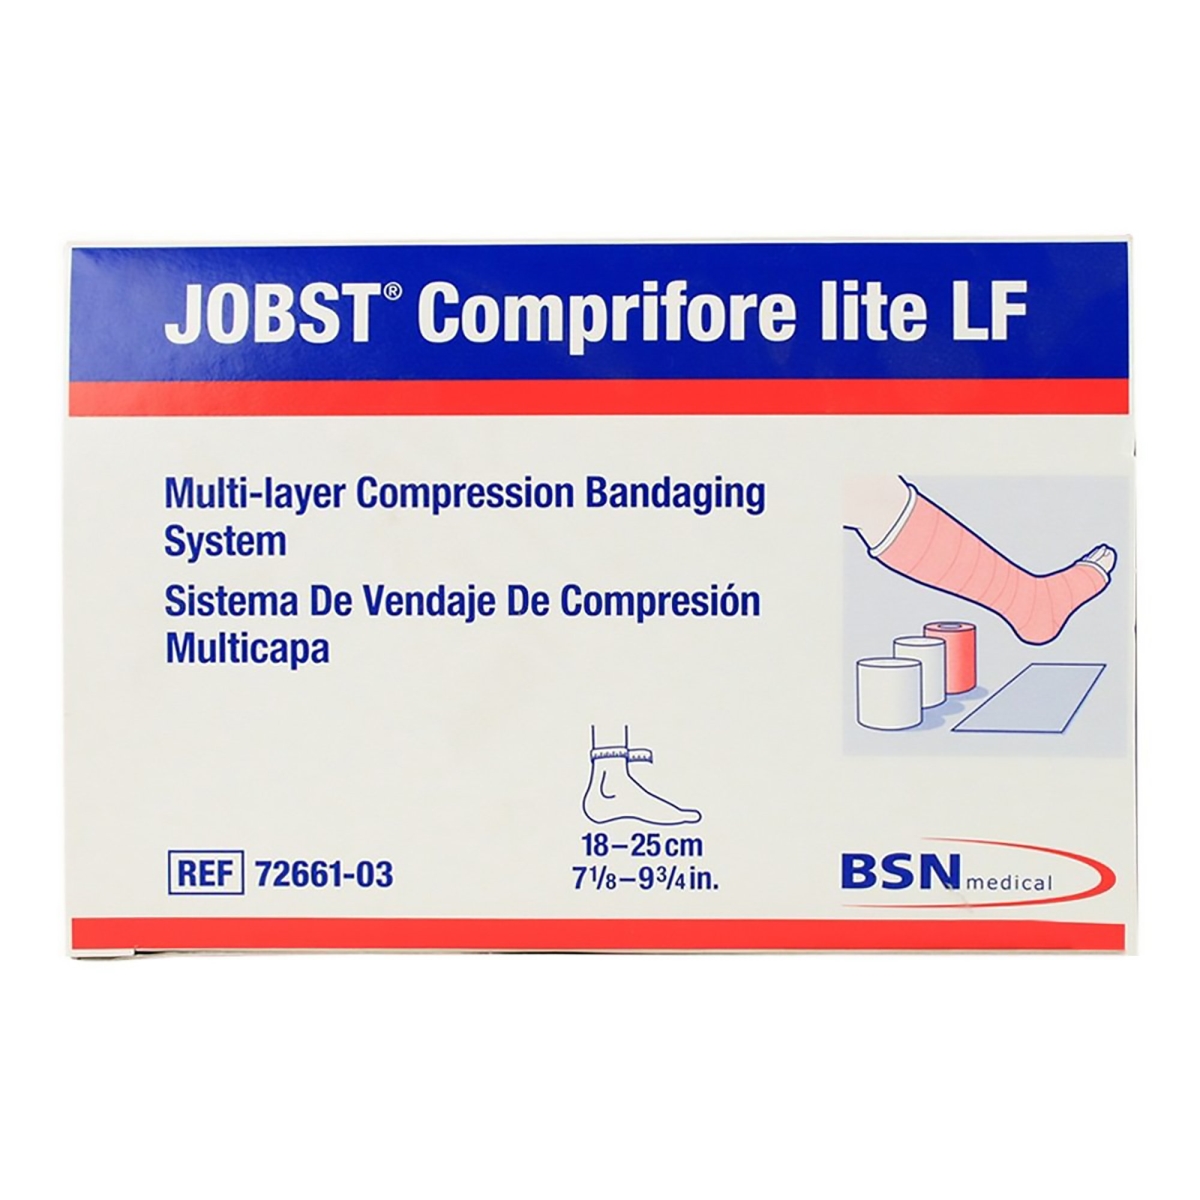 Picture of BSN Medical 26612000 Tan & White One Size Jobst Comprifore lite Non-Sterile Compression Bandage System - Pack of 3